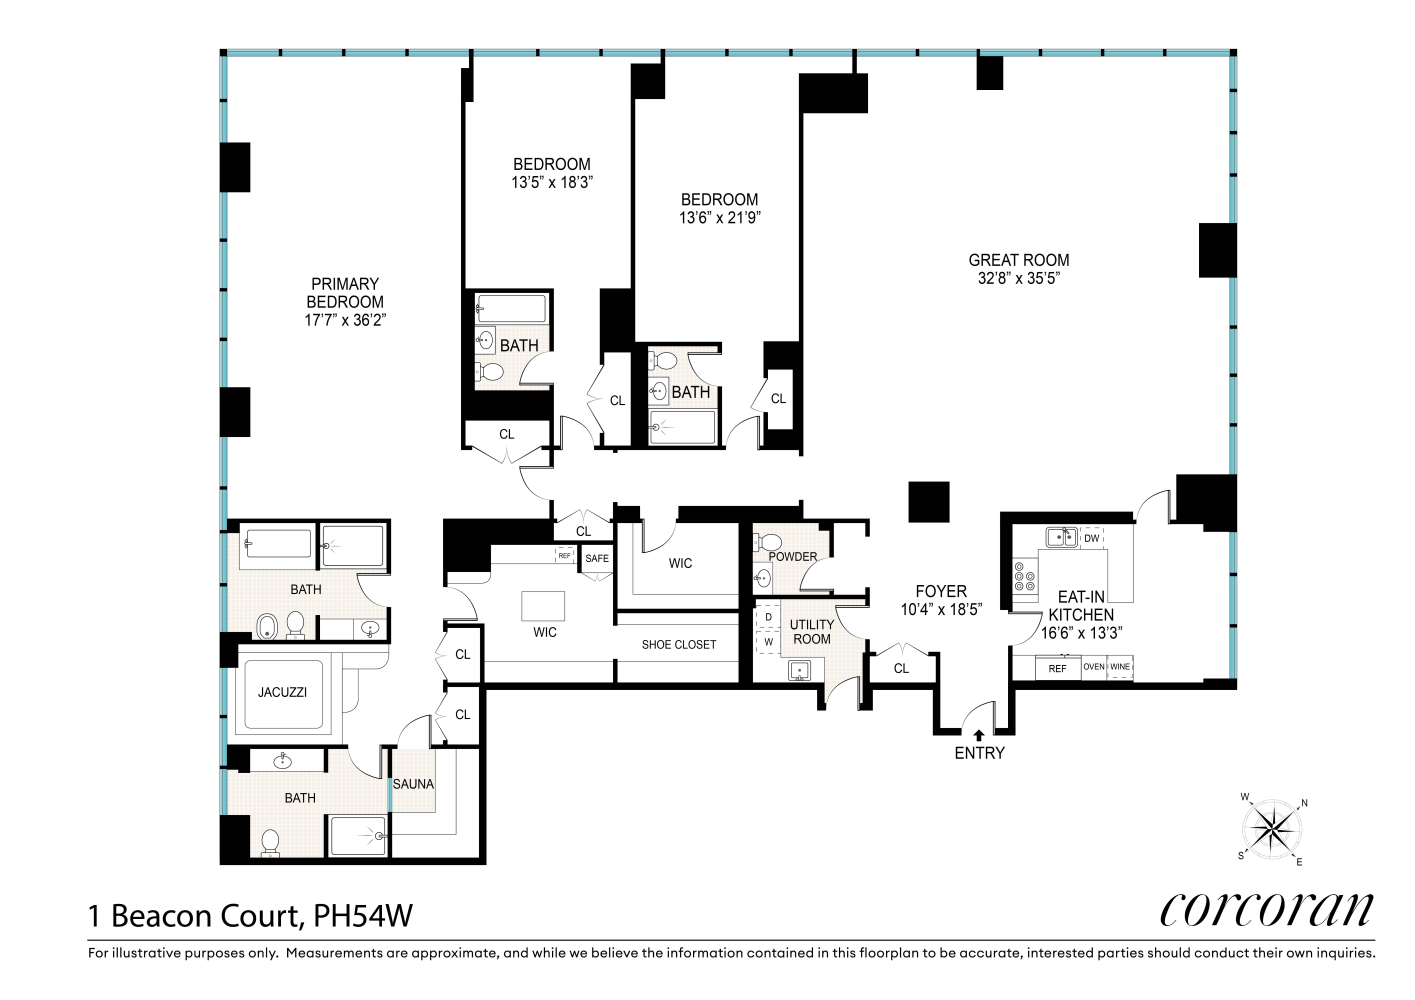 Property at One Beacon Court, 1 BEACON CT, PH54W Midtown East, New York, New York 10022